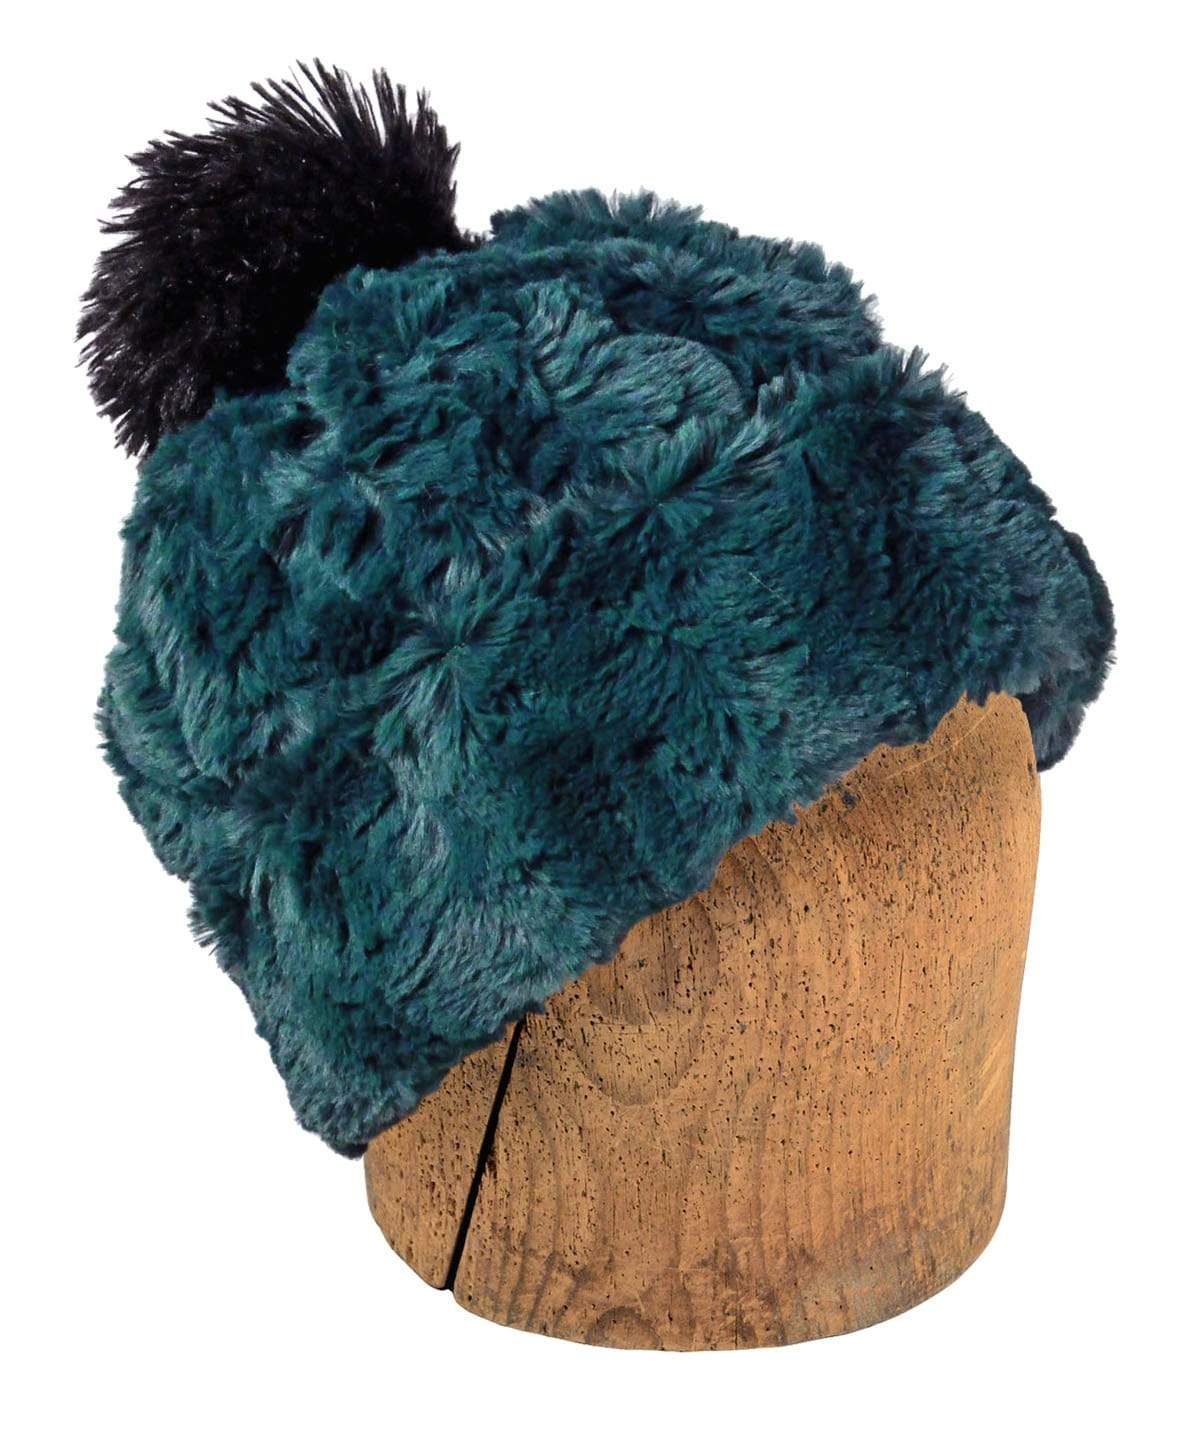 Men's Beanie Hat with Black Pom, Reversible | Peacock Teal Faux Fur | Handmade in the USA by Pandemonium Seattle